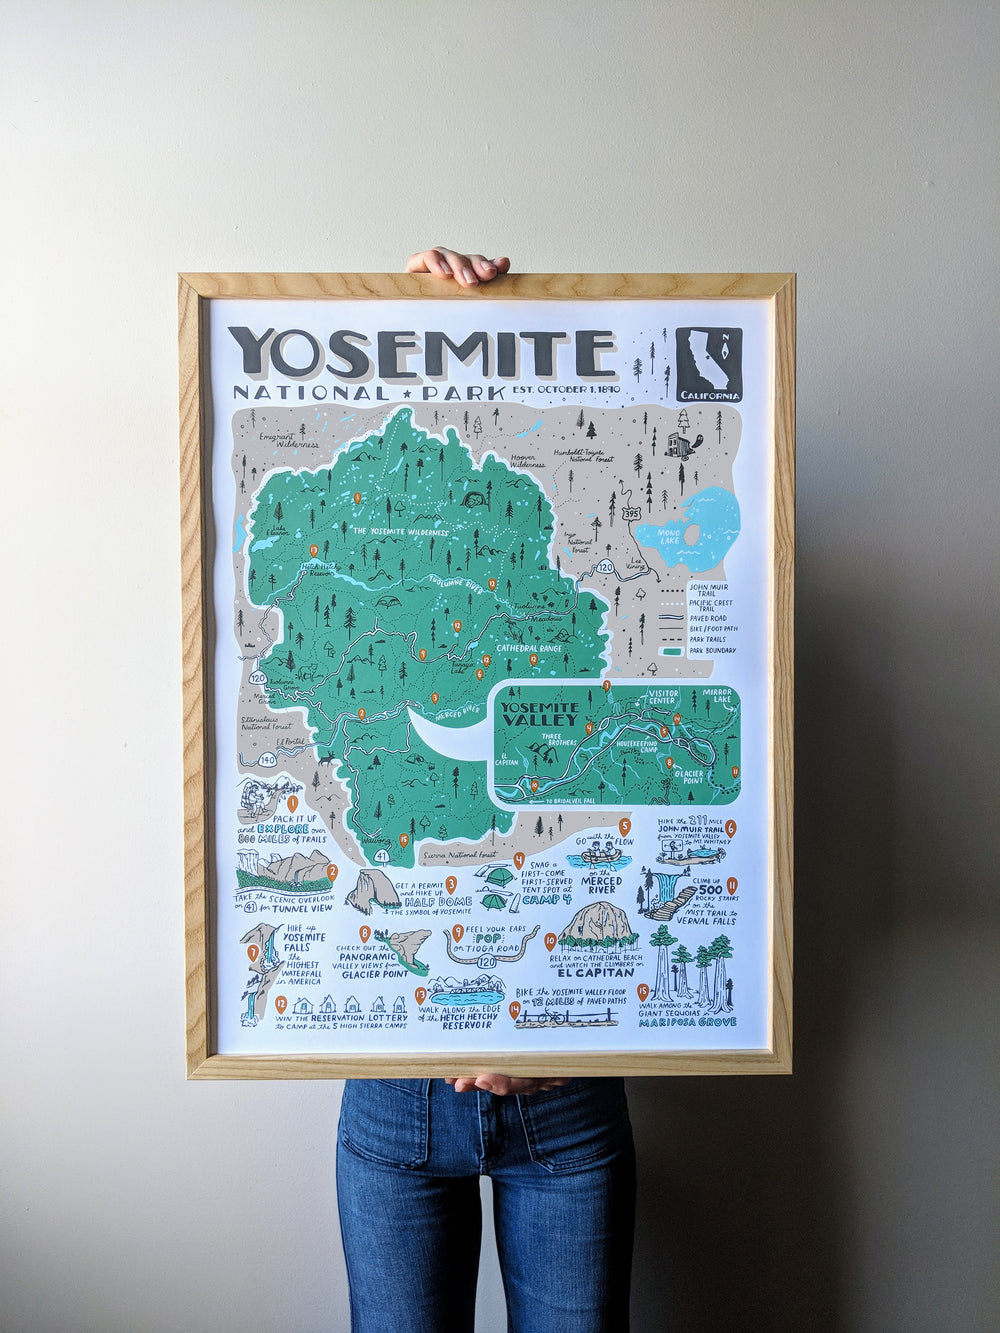 Yosemite Print by Brainstorm - Sales help support the Native American Rights Fund